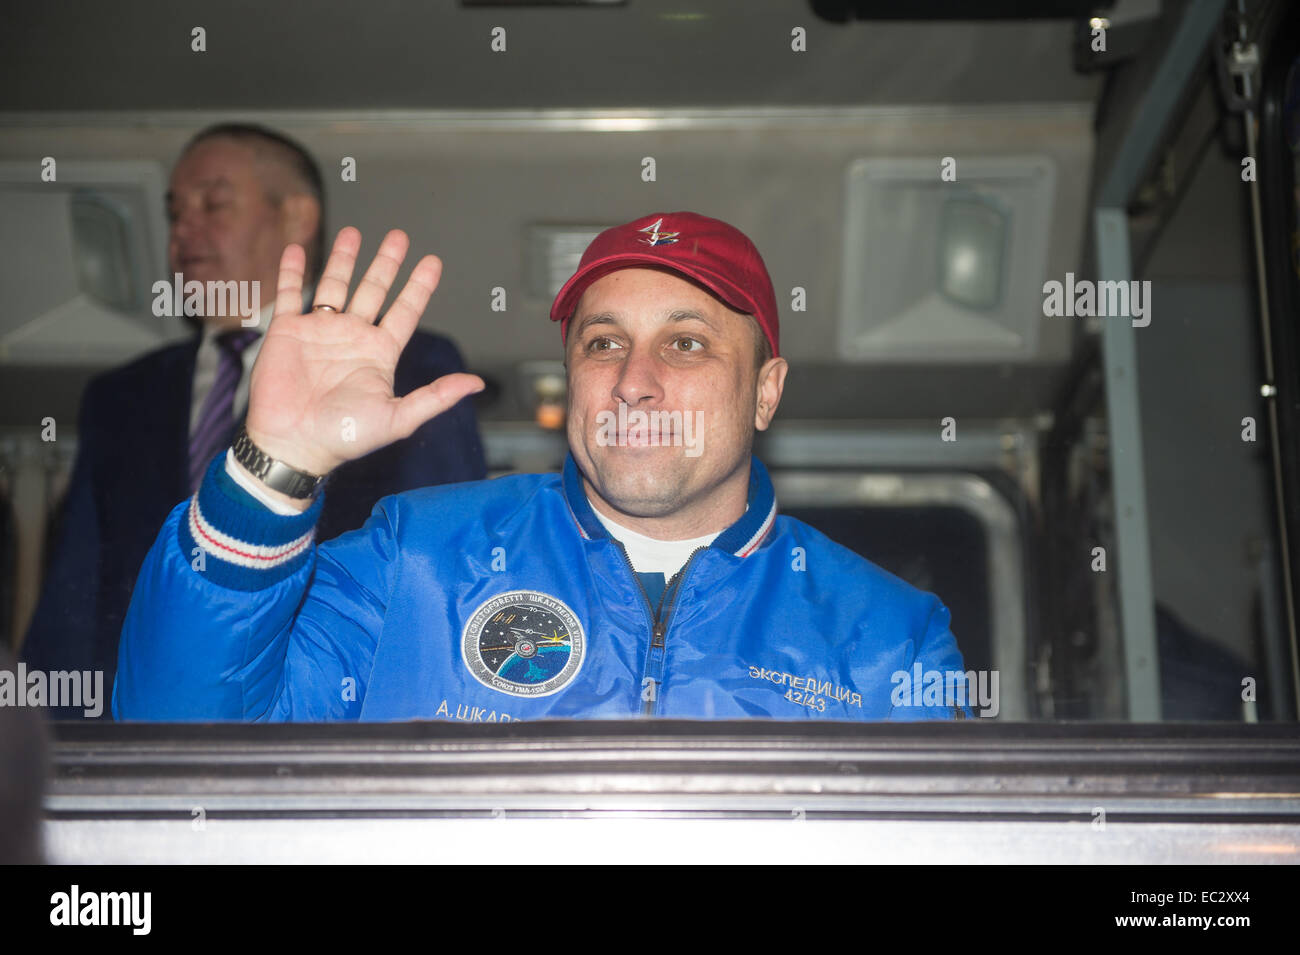 Expedition 42 Soyuz Commander Anton Shkaplerov of the Russian Federal Space Agency (Roscosmos) waves farewell to family and friends as he departs the Cosmonaut Hotel to suit up for the Soyuz launch to the International Space Station on Sunday, Nov. 23, 2014, in Baikonur, Kazakhstan. Launch of the Soyuz rocket is scheduled for the early hours of Nov. 24 and will send Shkaplerov, Flight Engineer Samantha Cristoforetti of the European Space Agency (ESA), and Flight Engineer Terry Virts of NASA on a five and a half month mission aboard the International Space Station. Stock Photo